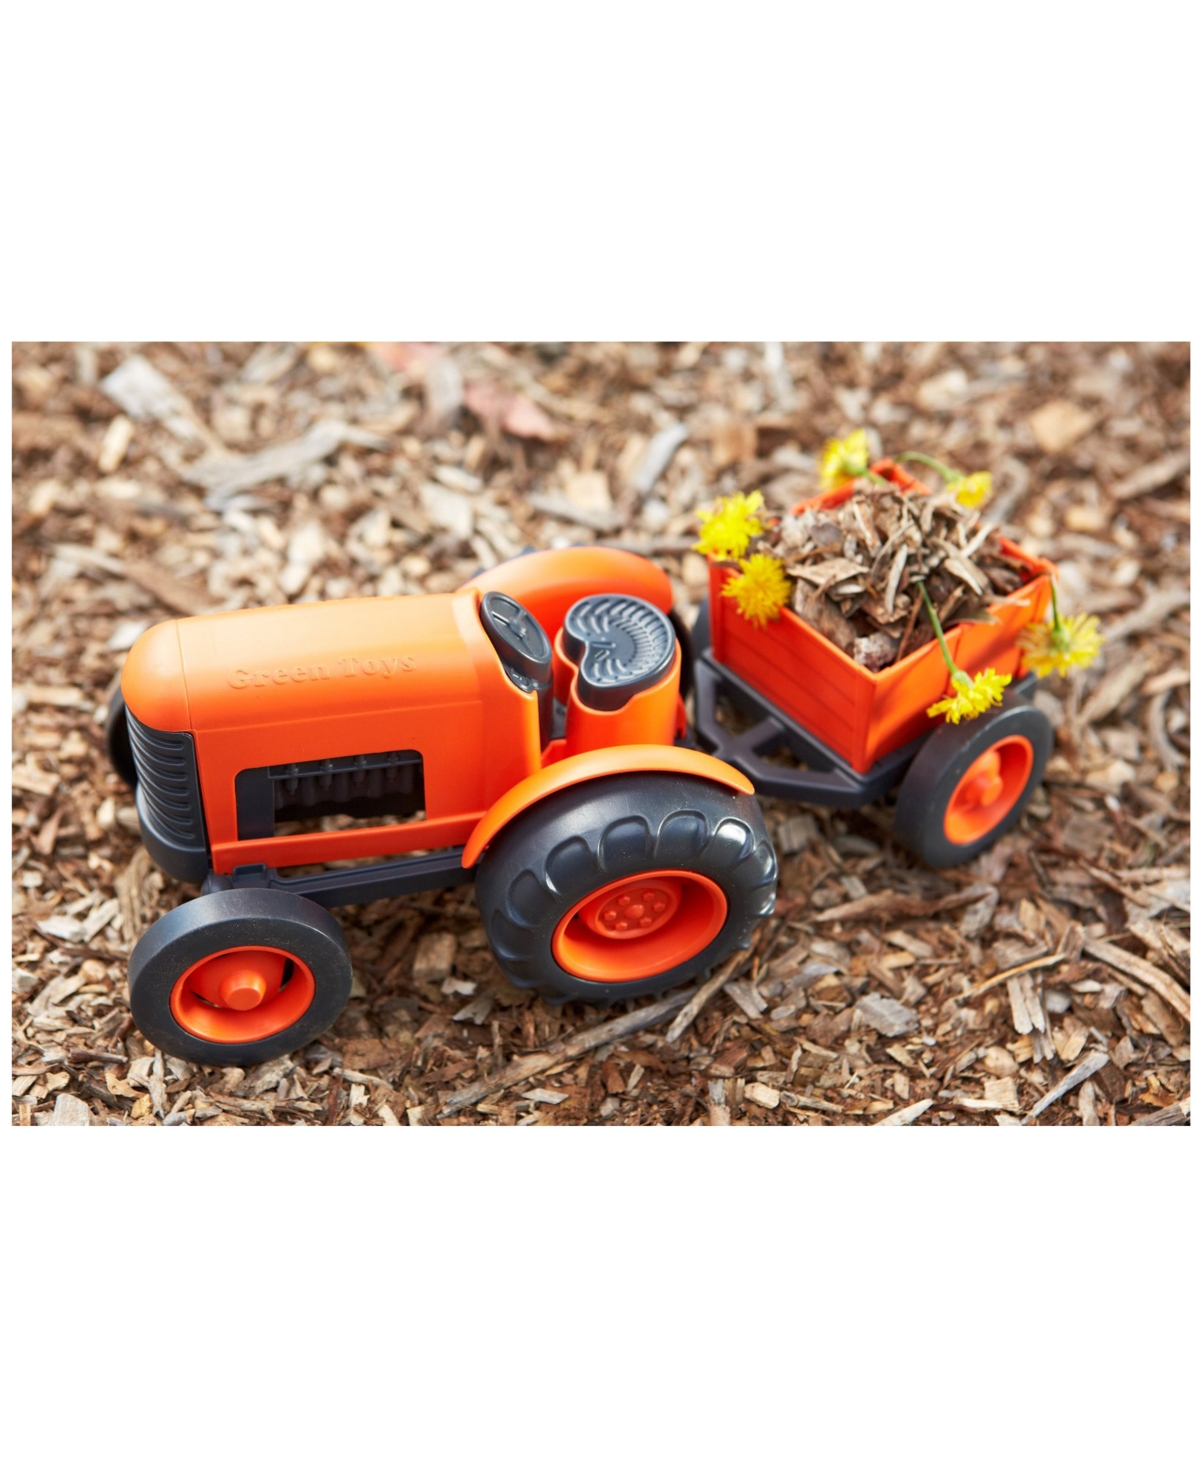 Shop Green Toys Tractor In Multi